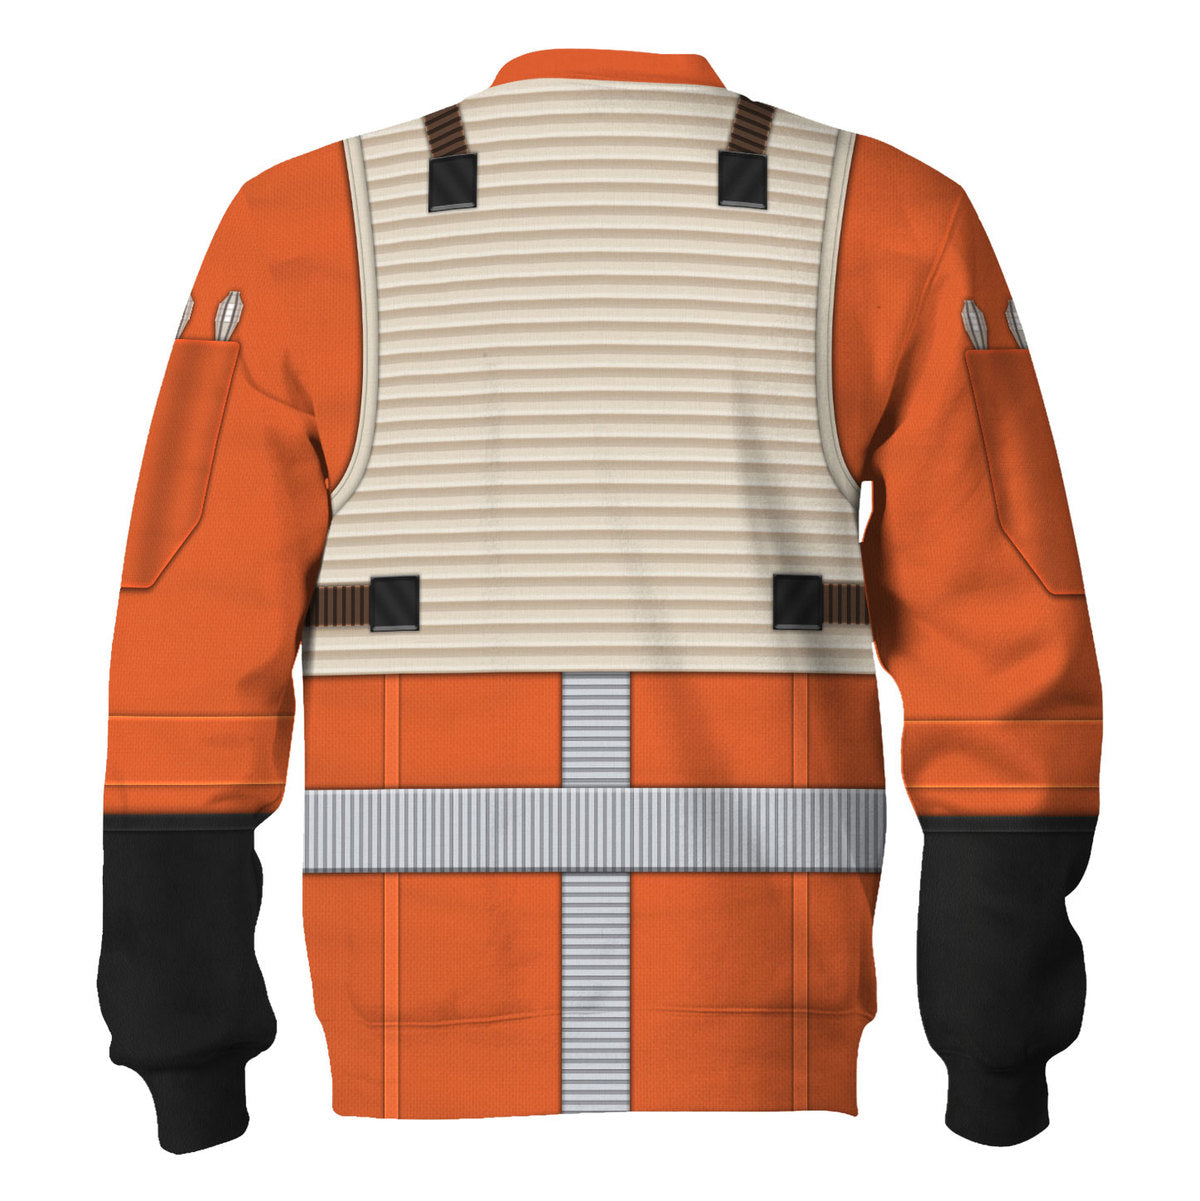 Star Wars Flight Suit Costume - Sweater - Ugly Christmas Sweater